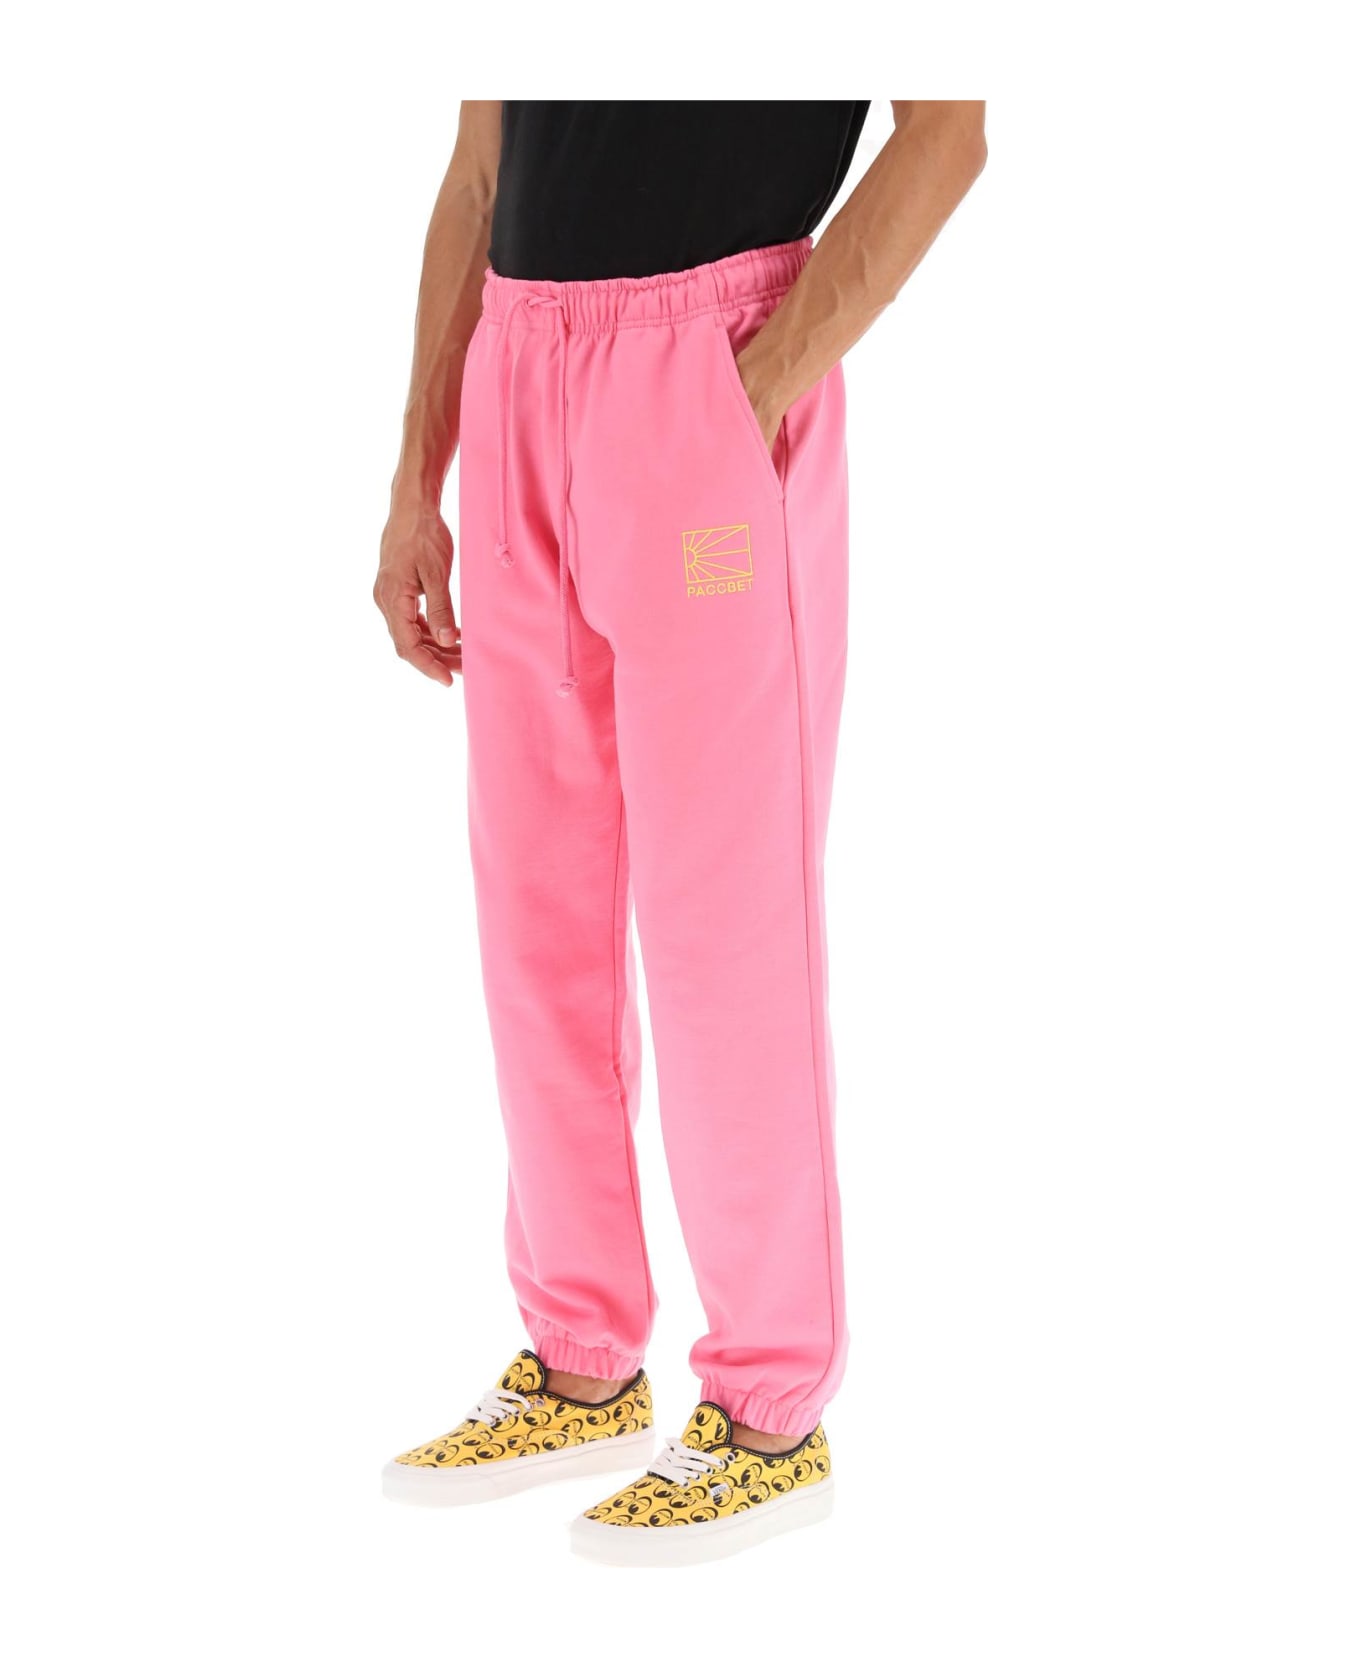 PACCBET Logo Embroidery Jogger Pants - PINK 4 (Pink)